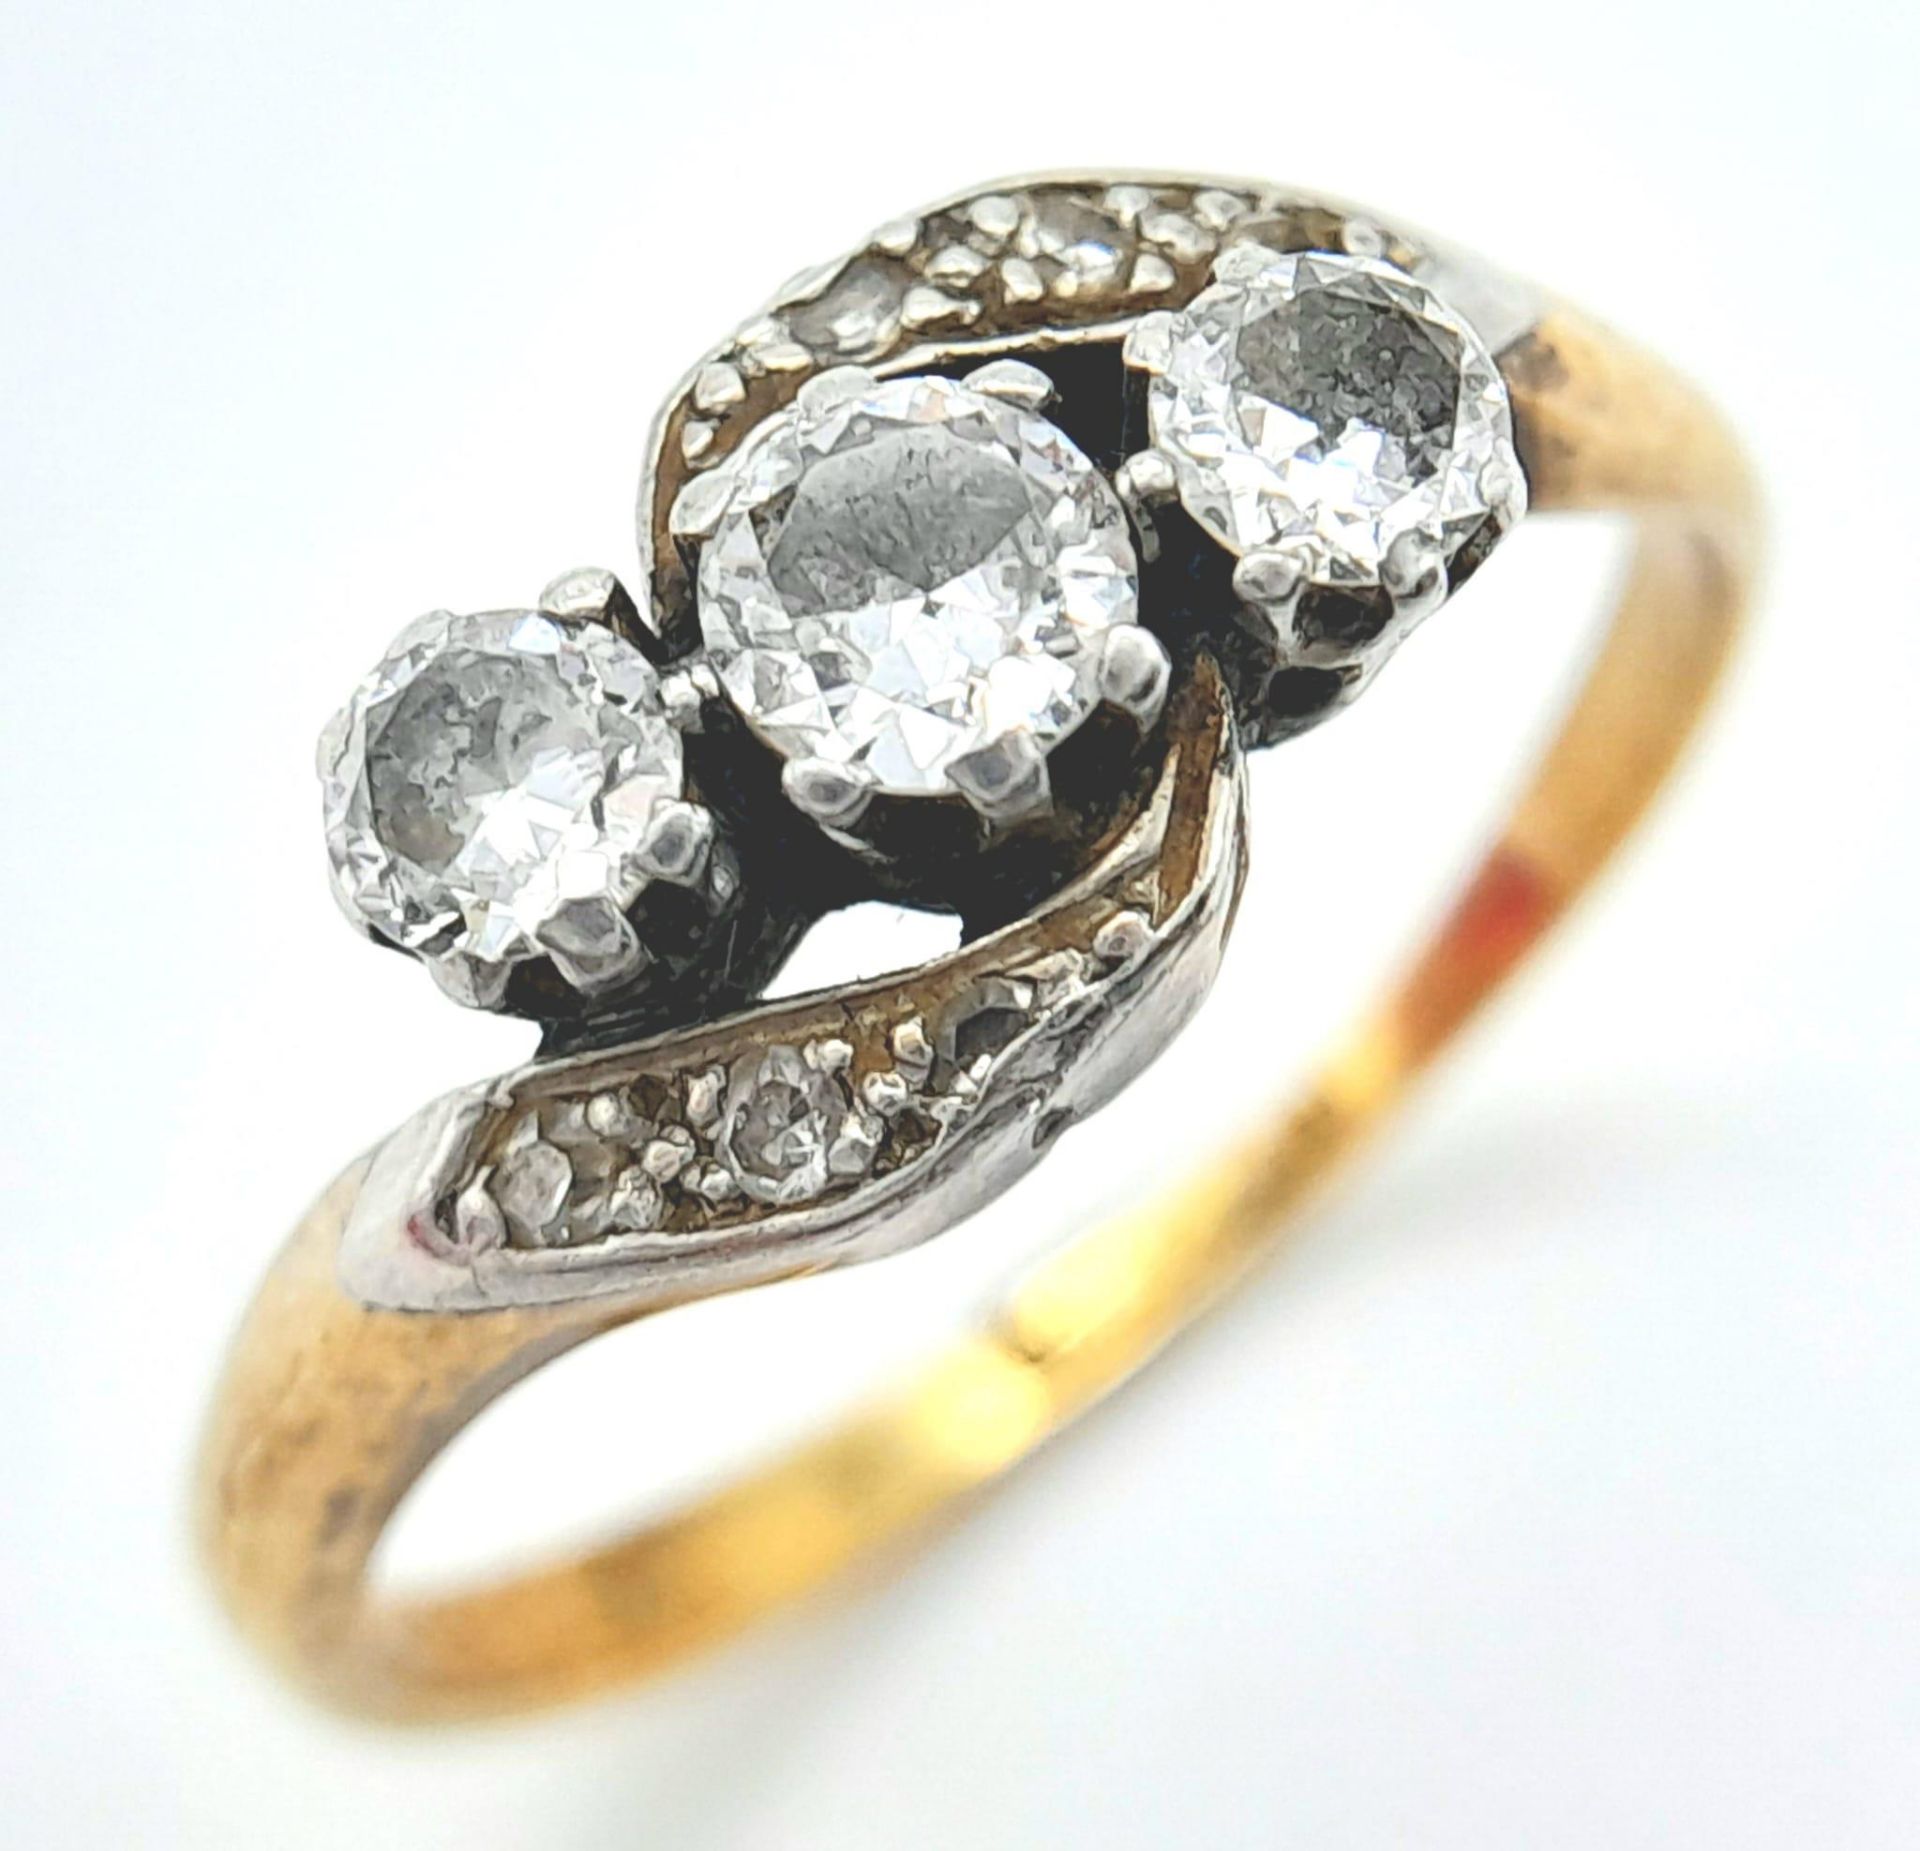 AN ANTIQUE 18K GOLD CROSSOVER STYLE RING WITH A TRILOGY OF DIAMONDS SET IN PLATINUM . 3.6gms size - Image 5 of 7